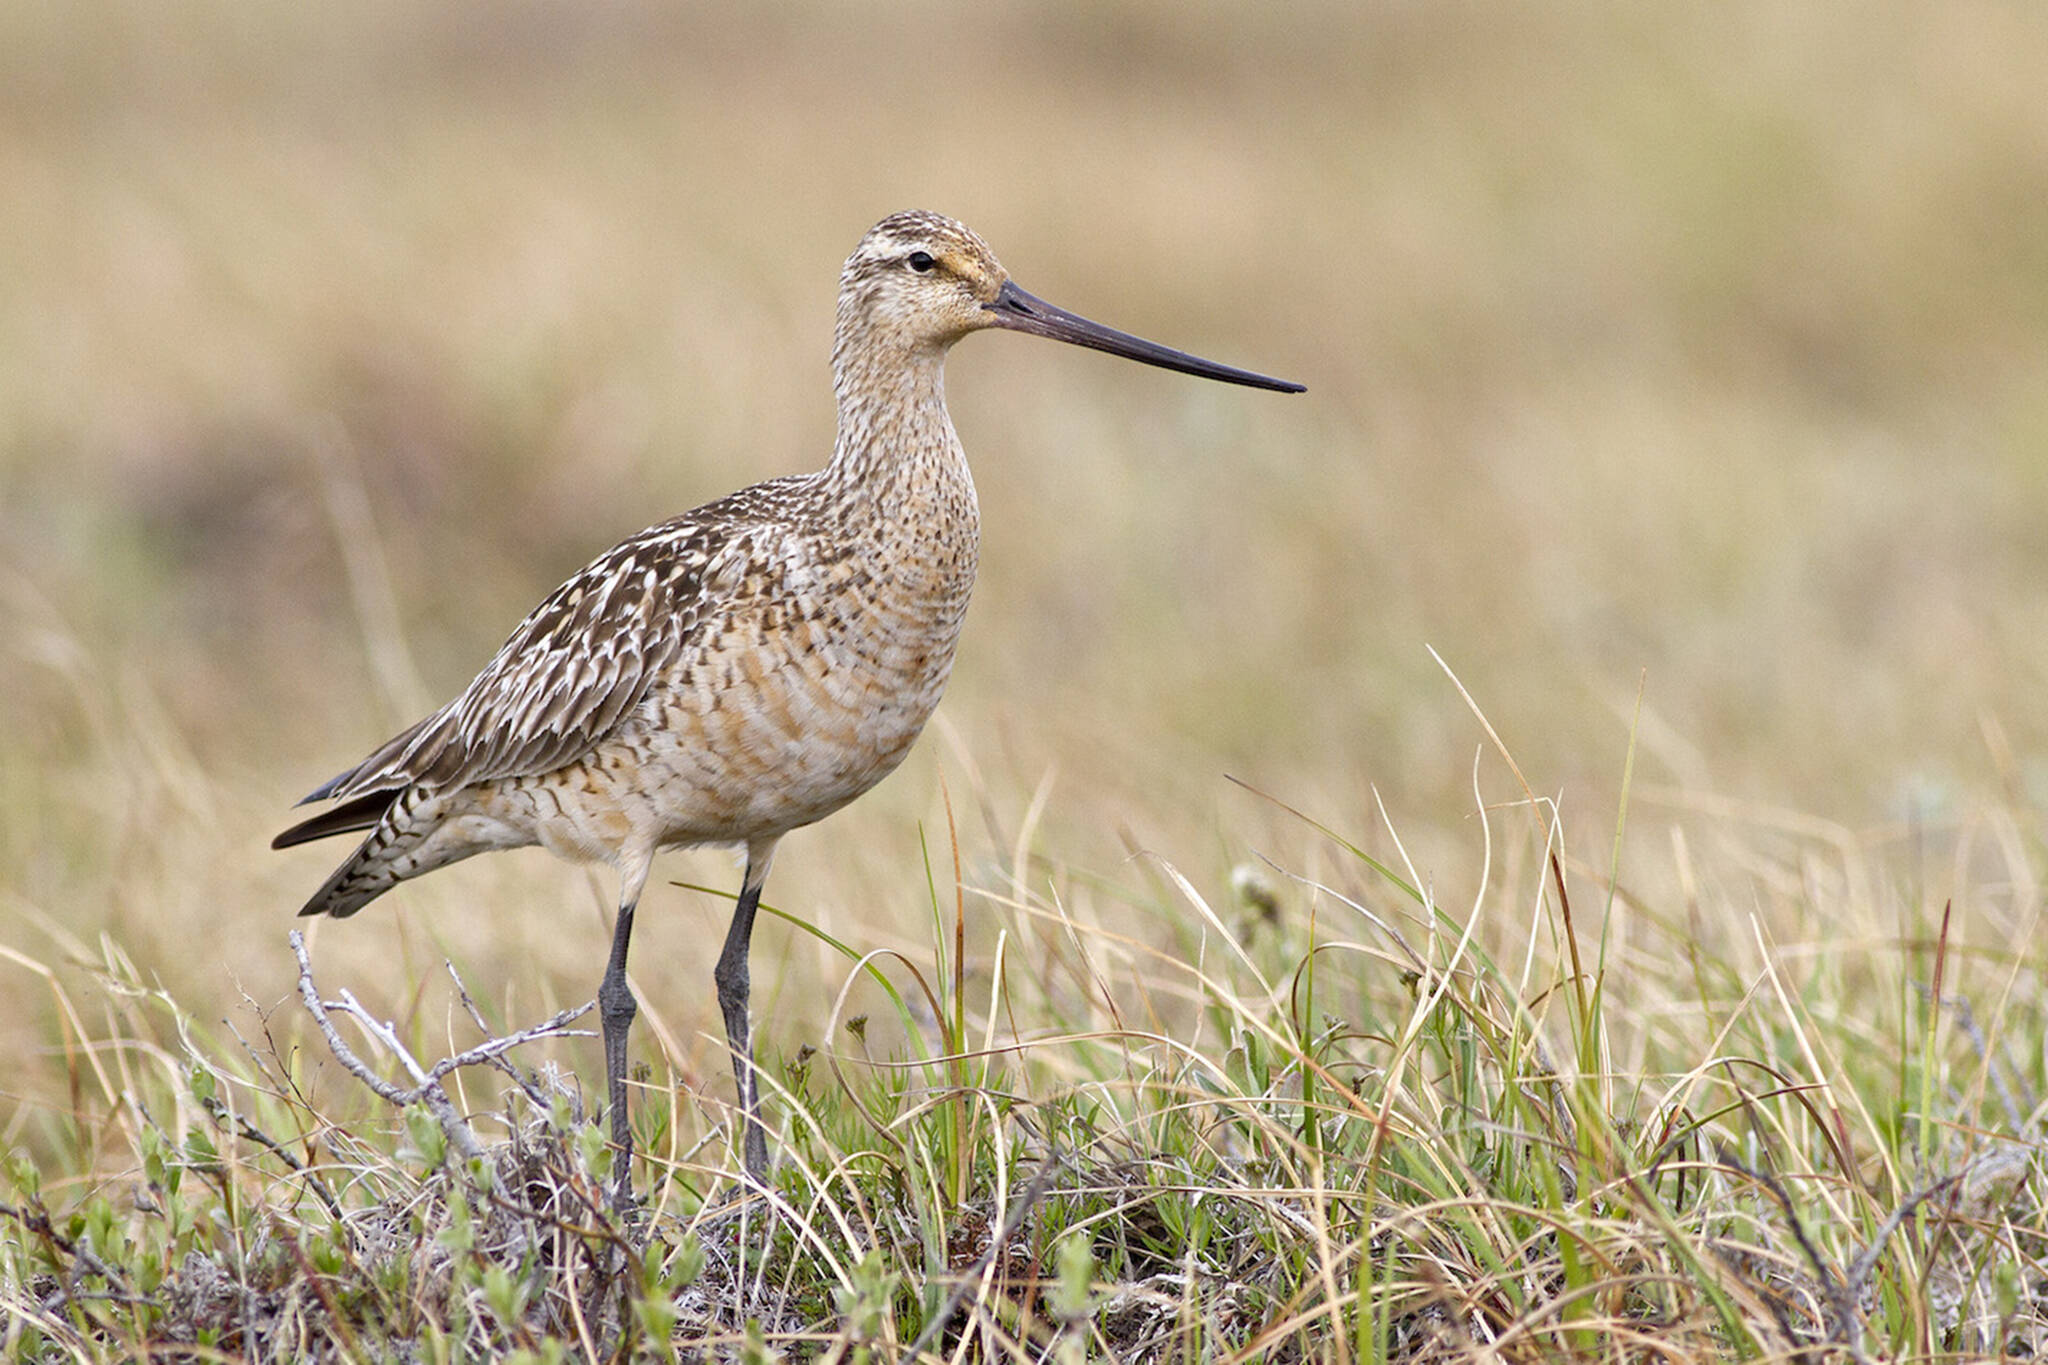 A bar-tailed godwit born in Alaska that undertakes one of the greatest non-stop migrations in the animal kingdom, often flying from Alaska straight to New Zealand in the fall. (Courtesy Photo / Zachary Pohlen)